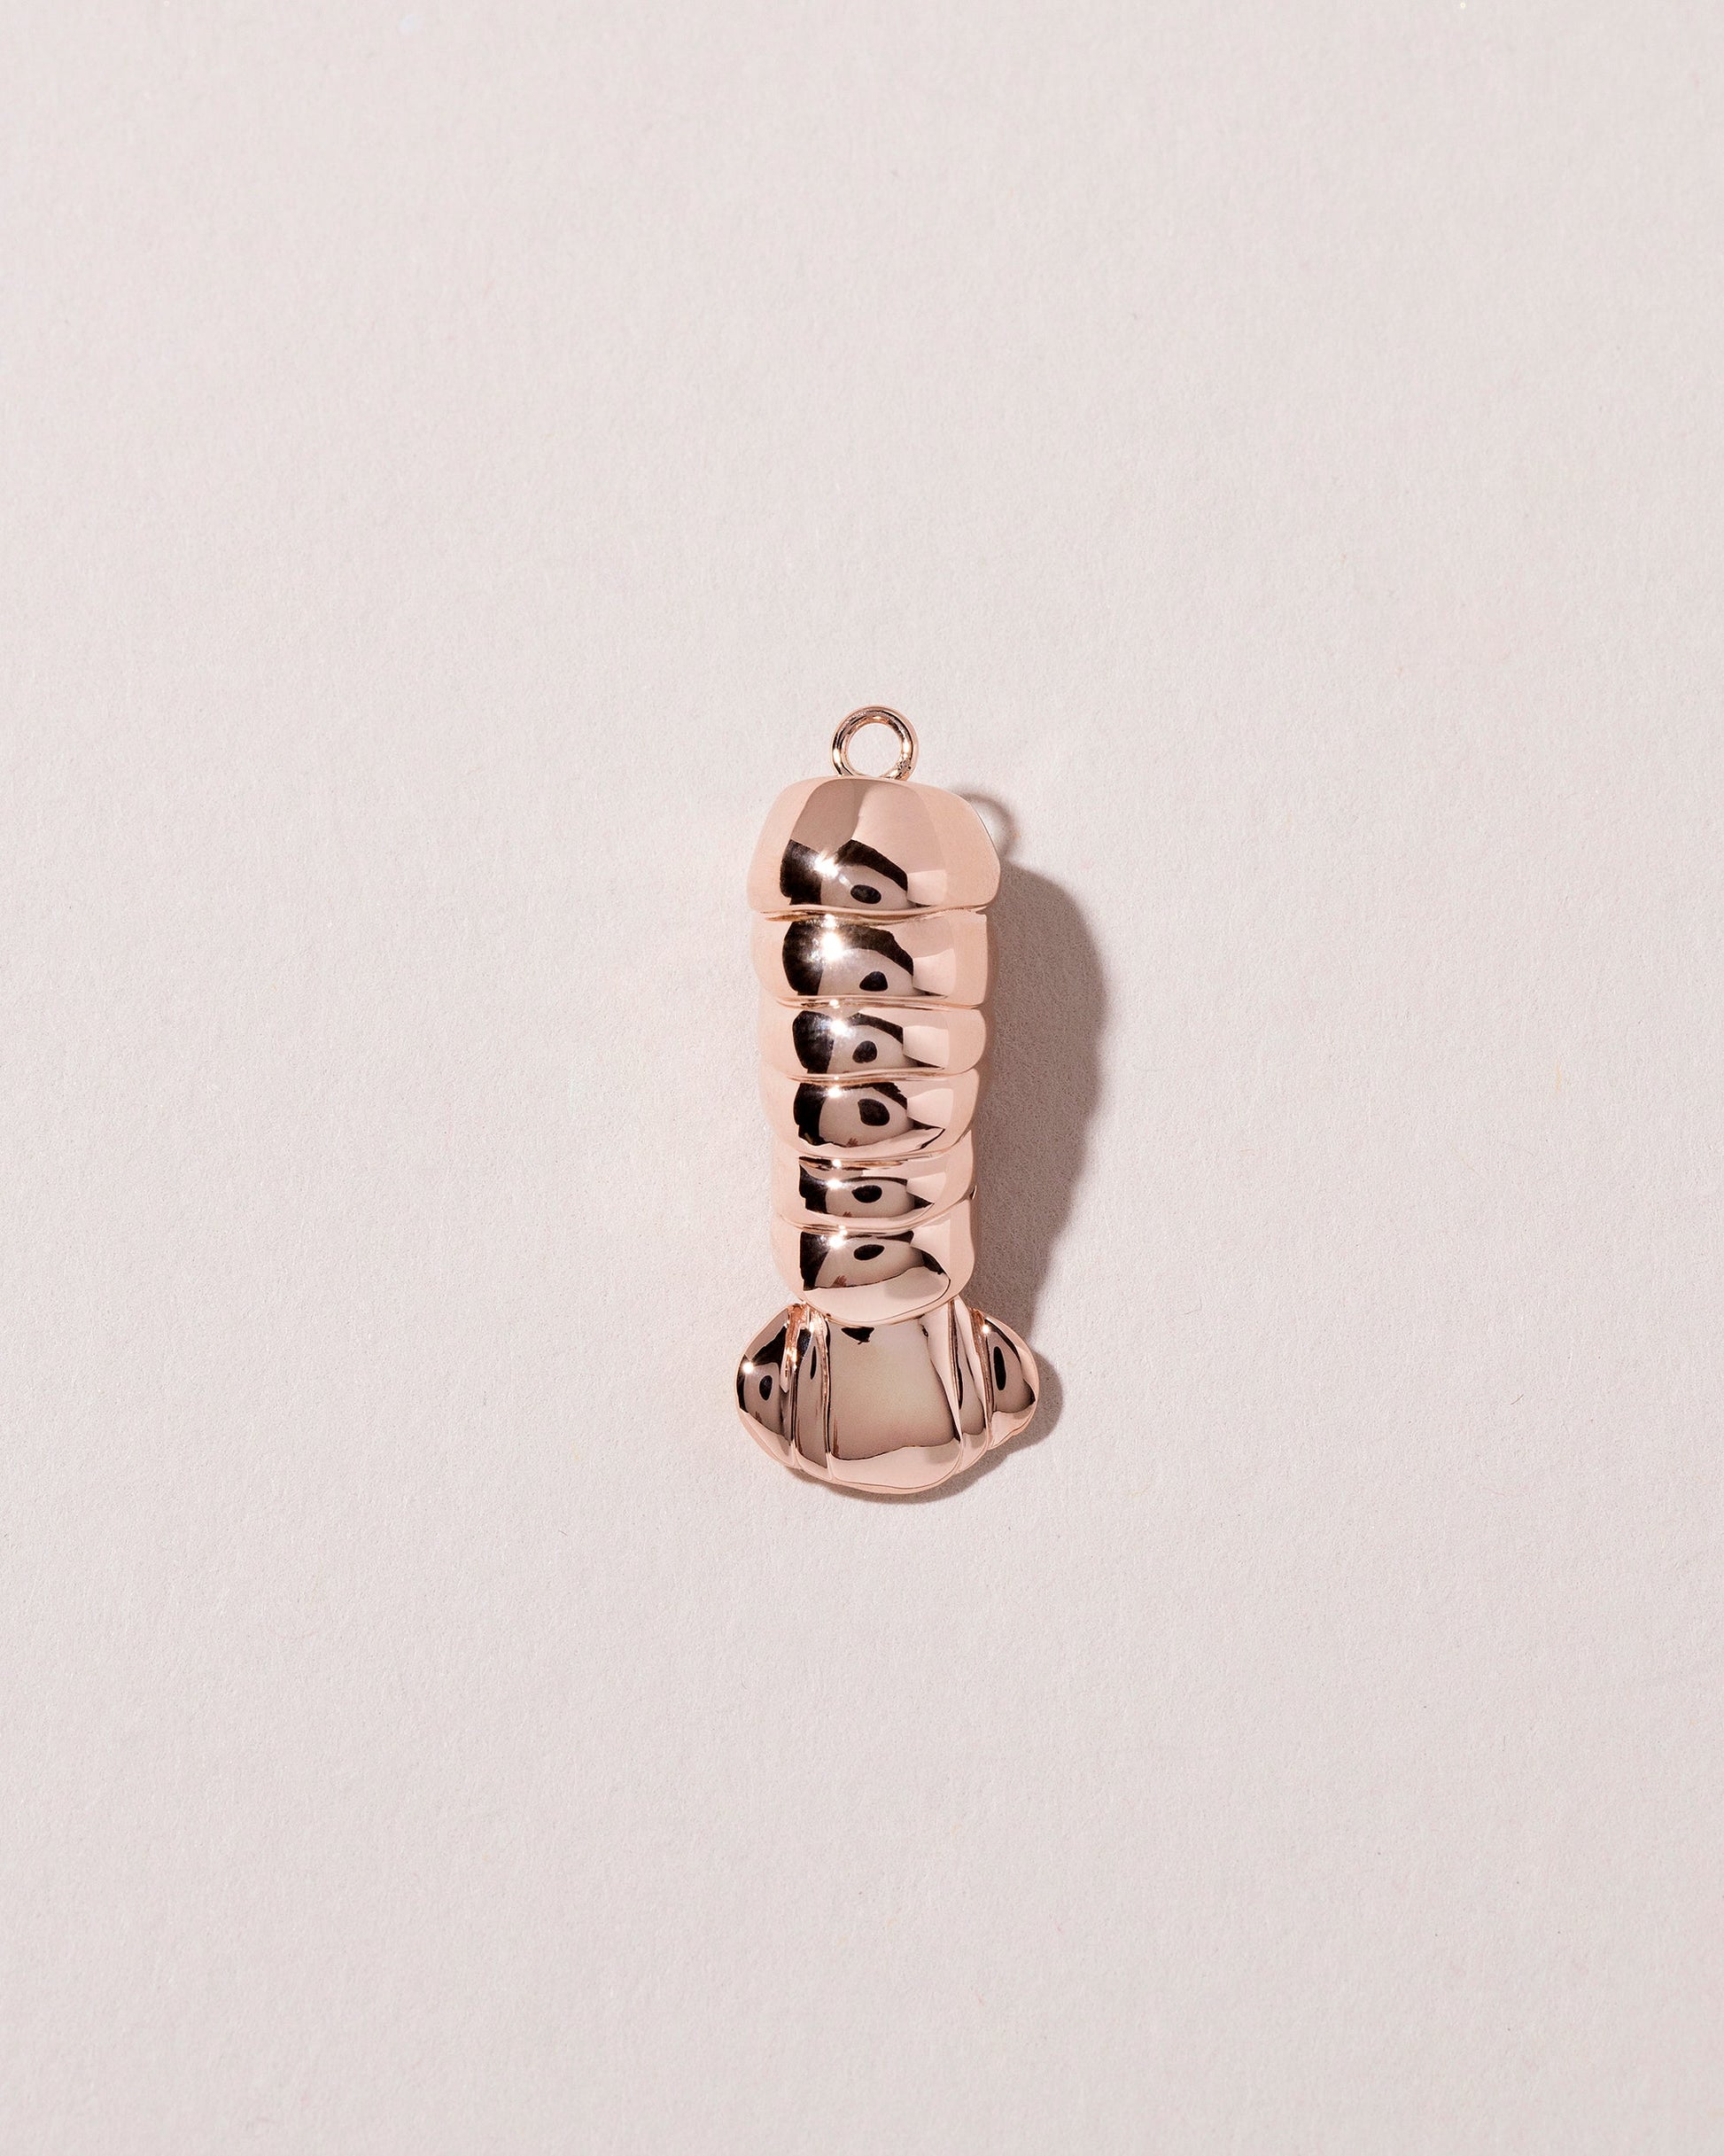  Lobster Tail Charm on light color background.